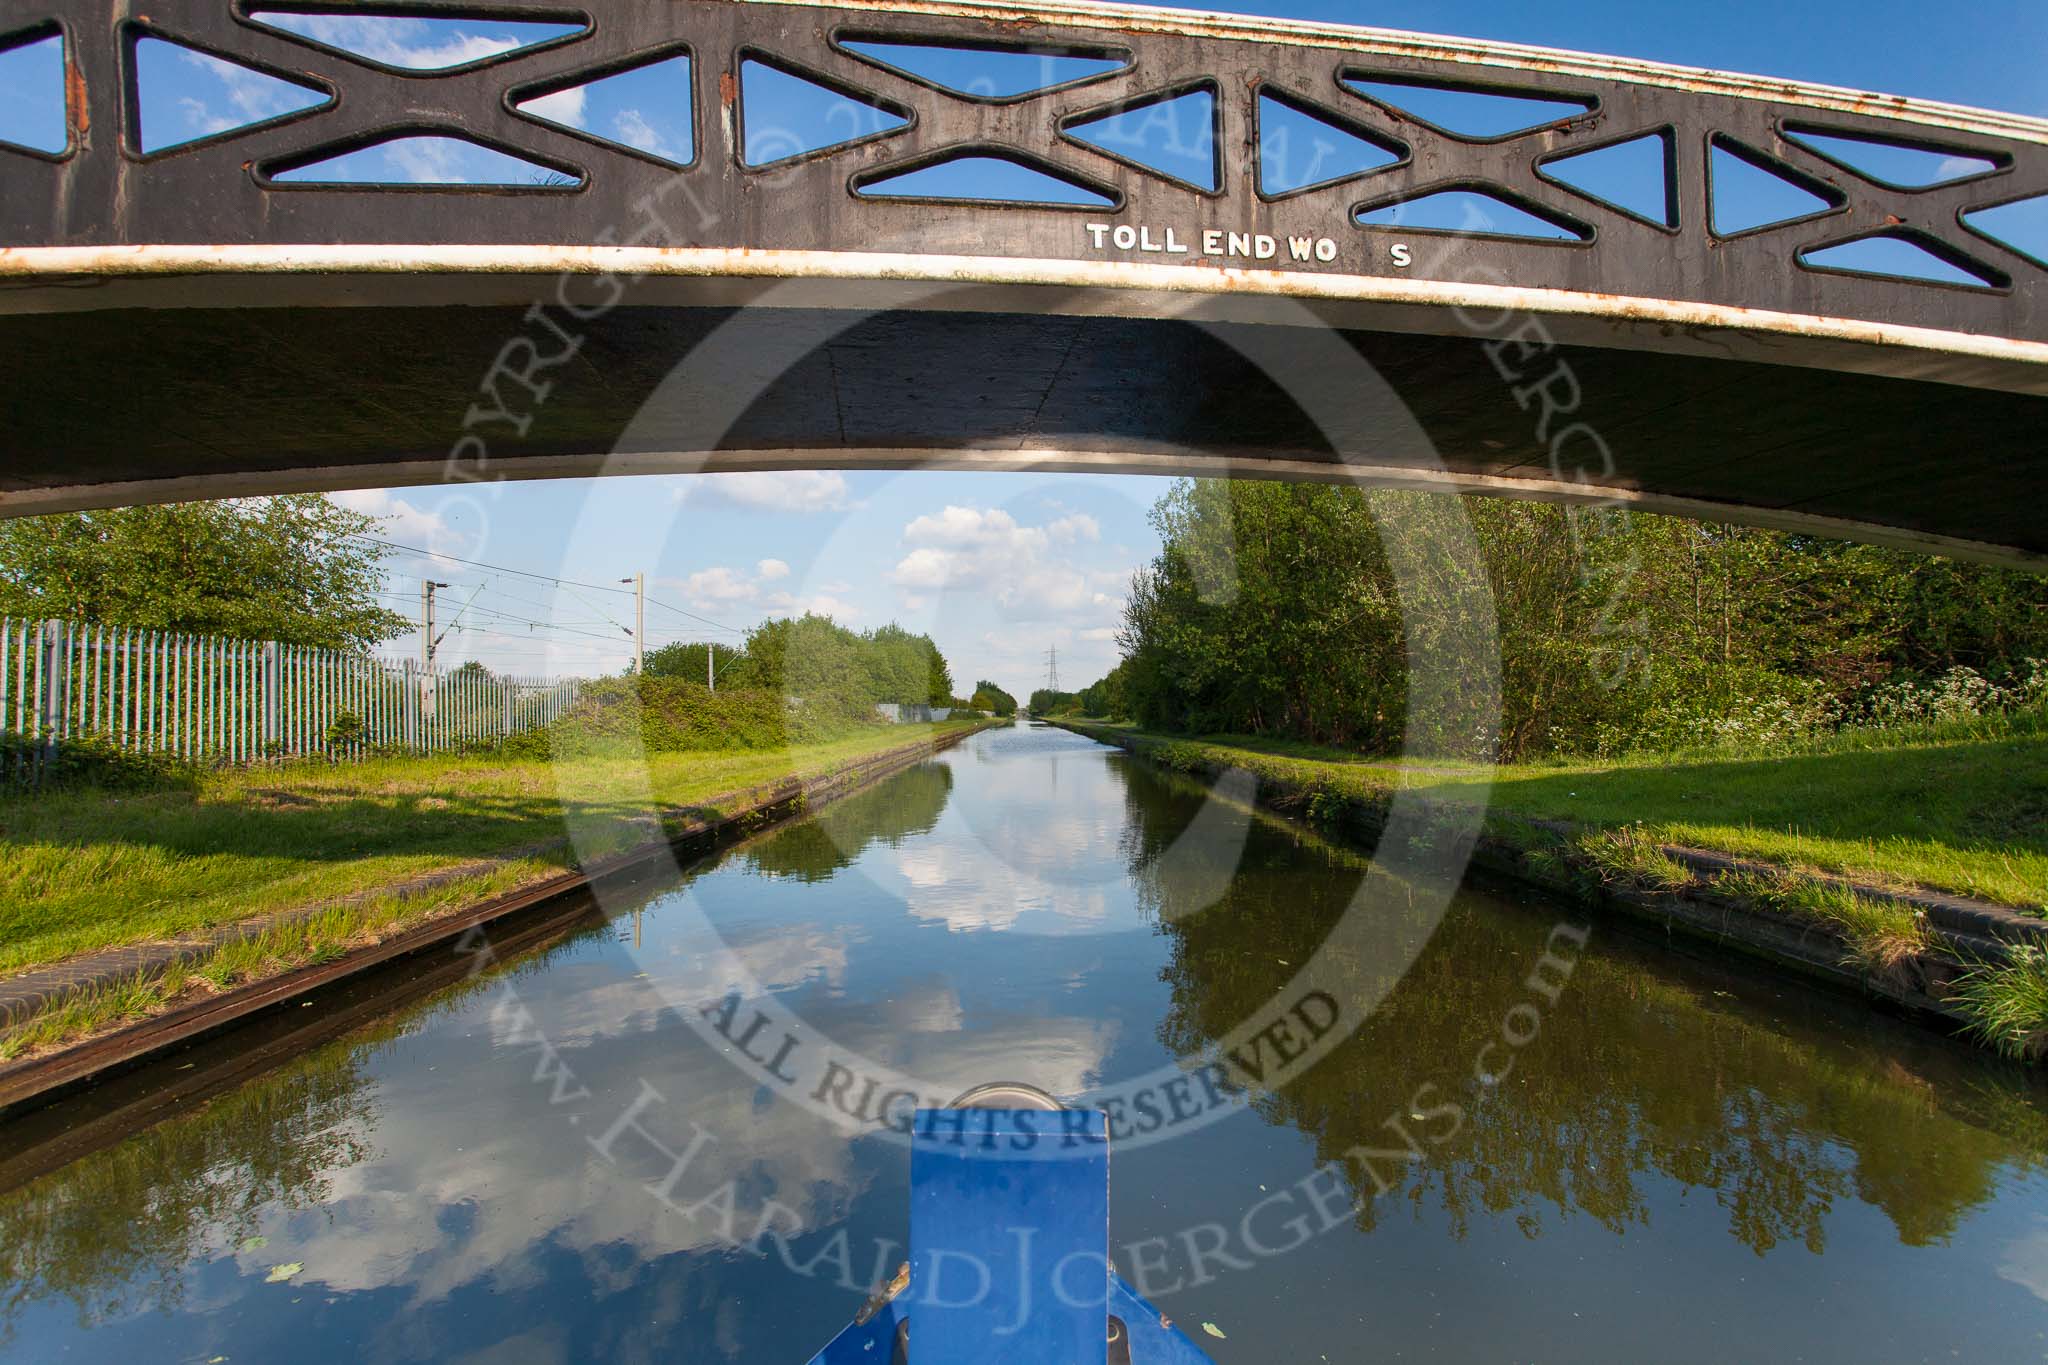 BCN Marathon Challenge 2013: "Toll End Works" cast iron footbridge over the BCN New Main Line at Tipton, next to Dudley Port Junction..
Birmingham Canal Navigation,


United Kingdom,
on 25 May 2013 at 18:35, image #288